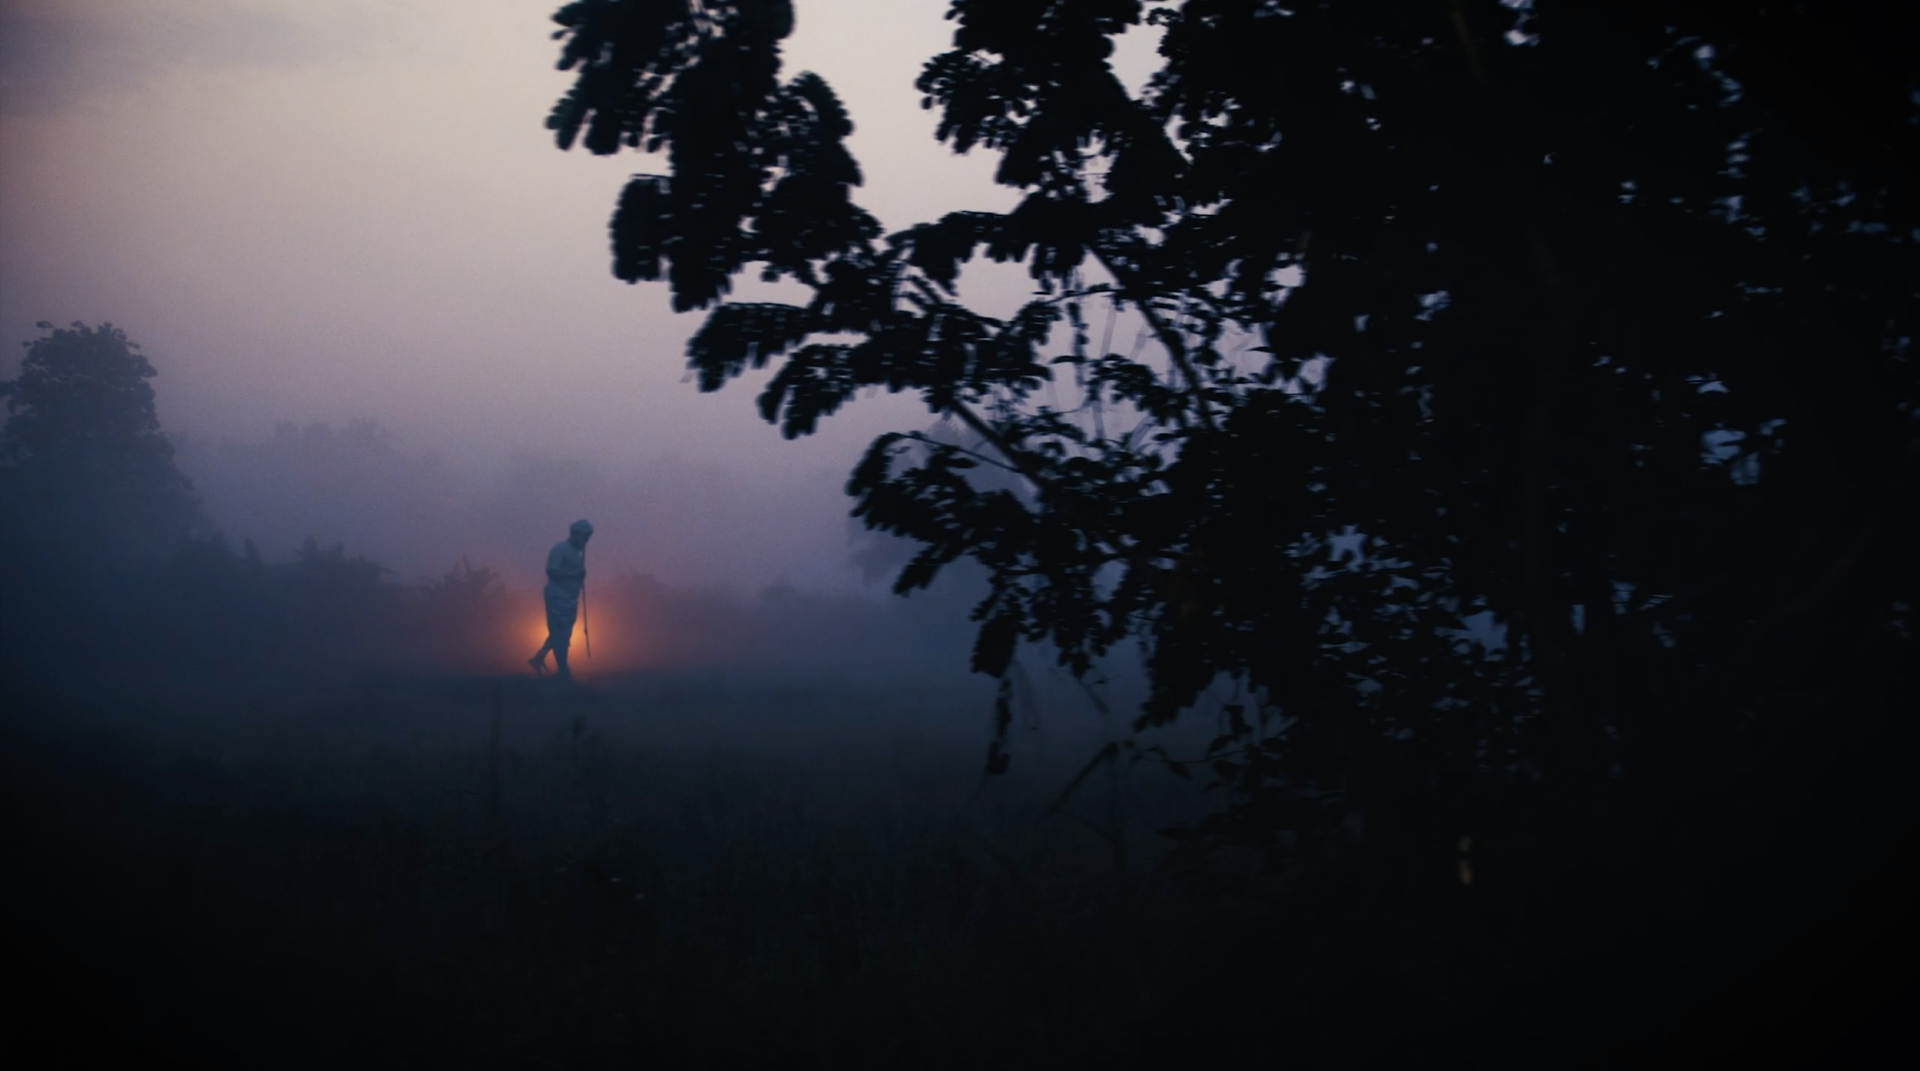 A still from Golden Jubilee. It shows a person walking through a dark field. There is a tree in the foreground, the sky is hues of purple. There is a soft golden light behind the person.